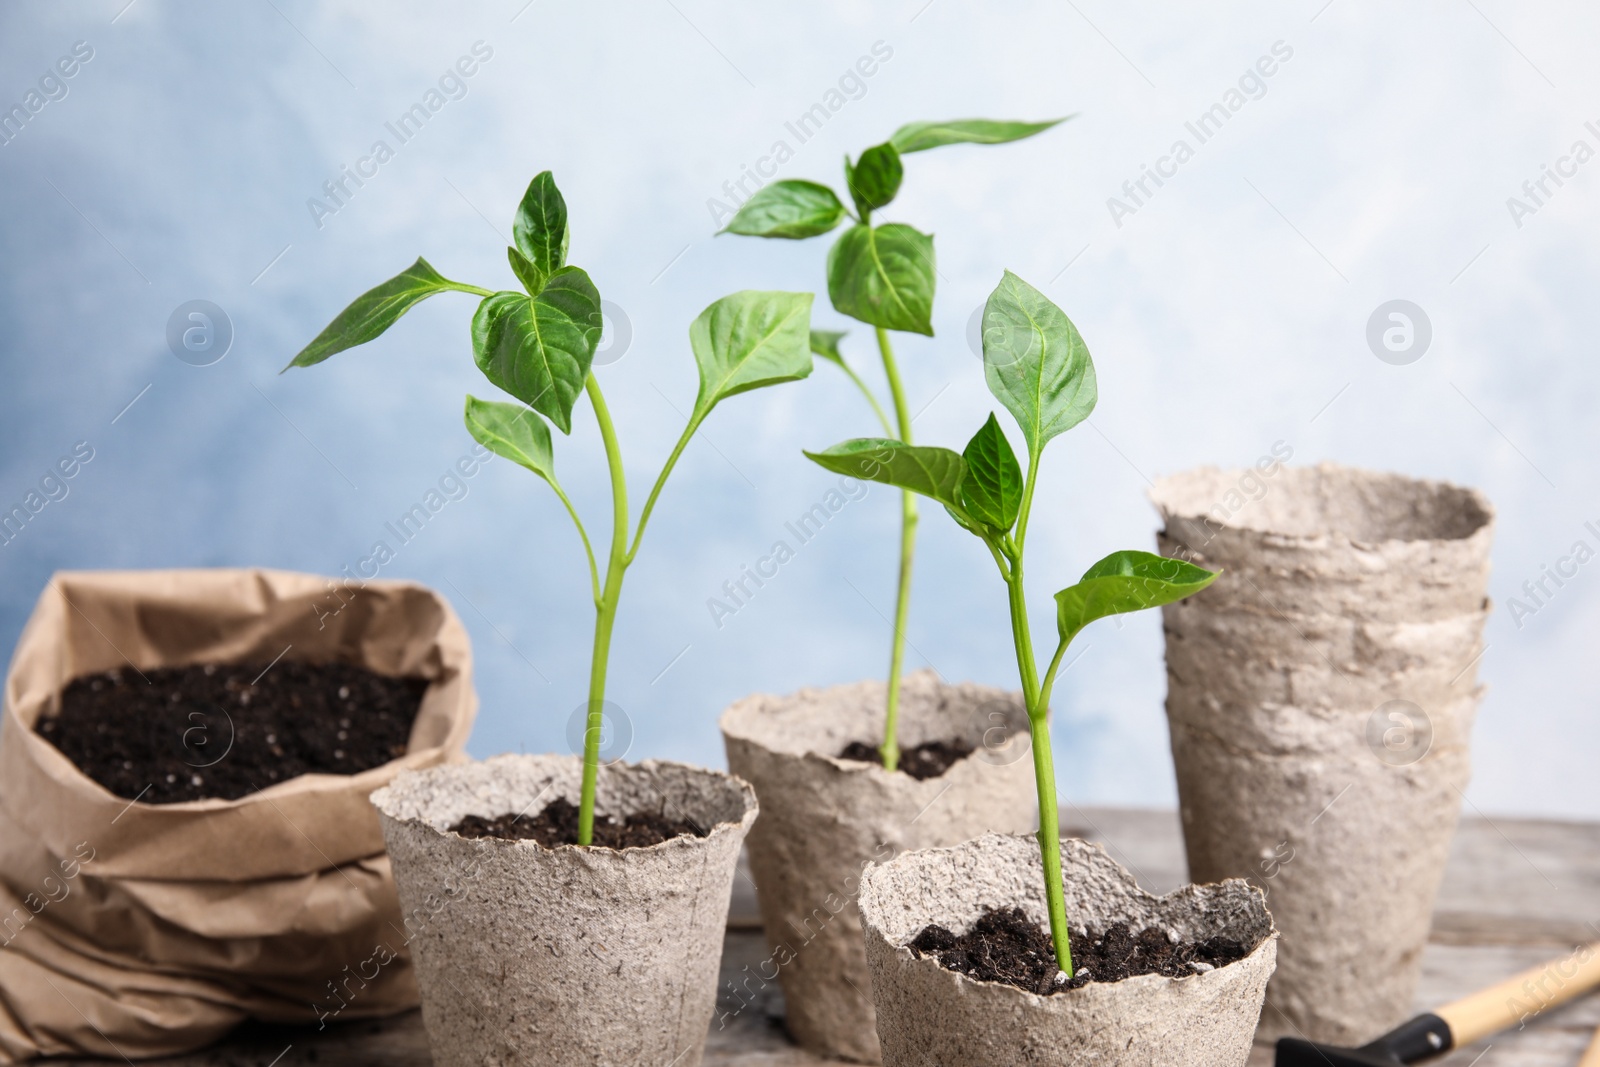 Photo of Vegetable seedlings in peat pots on table against light background